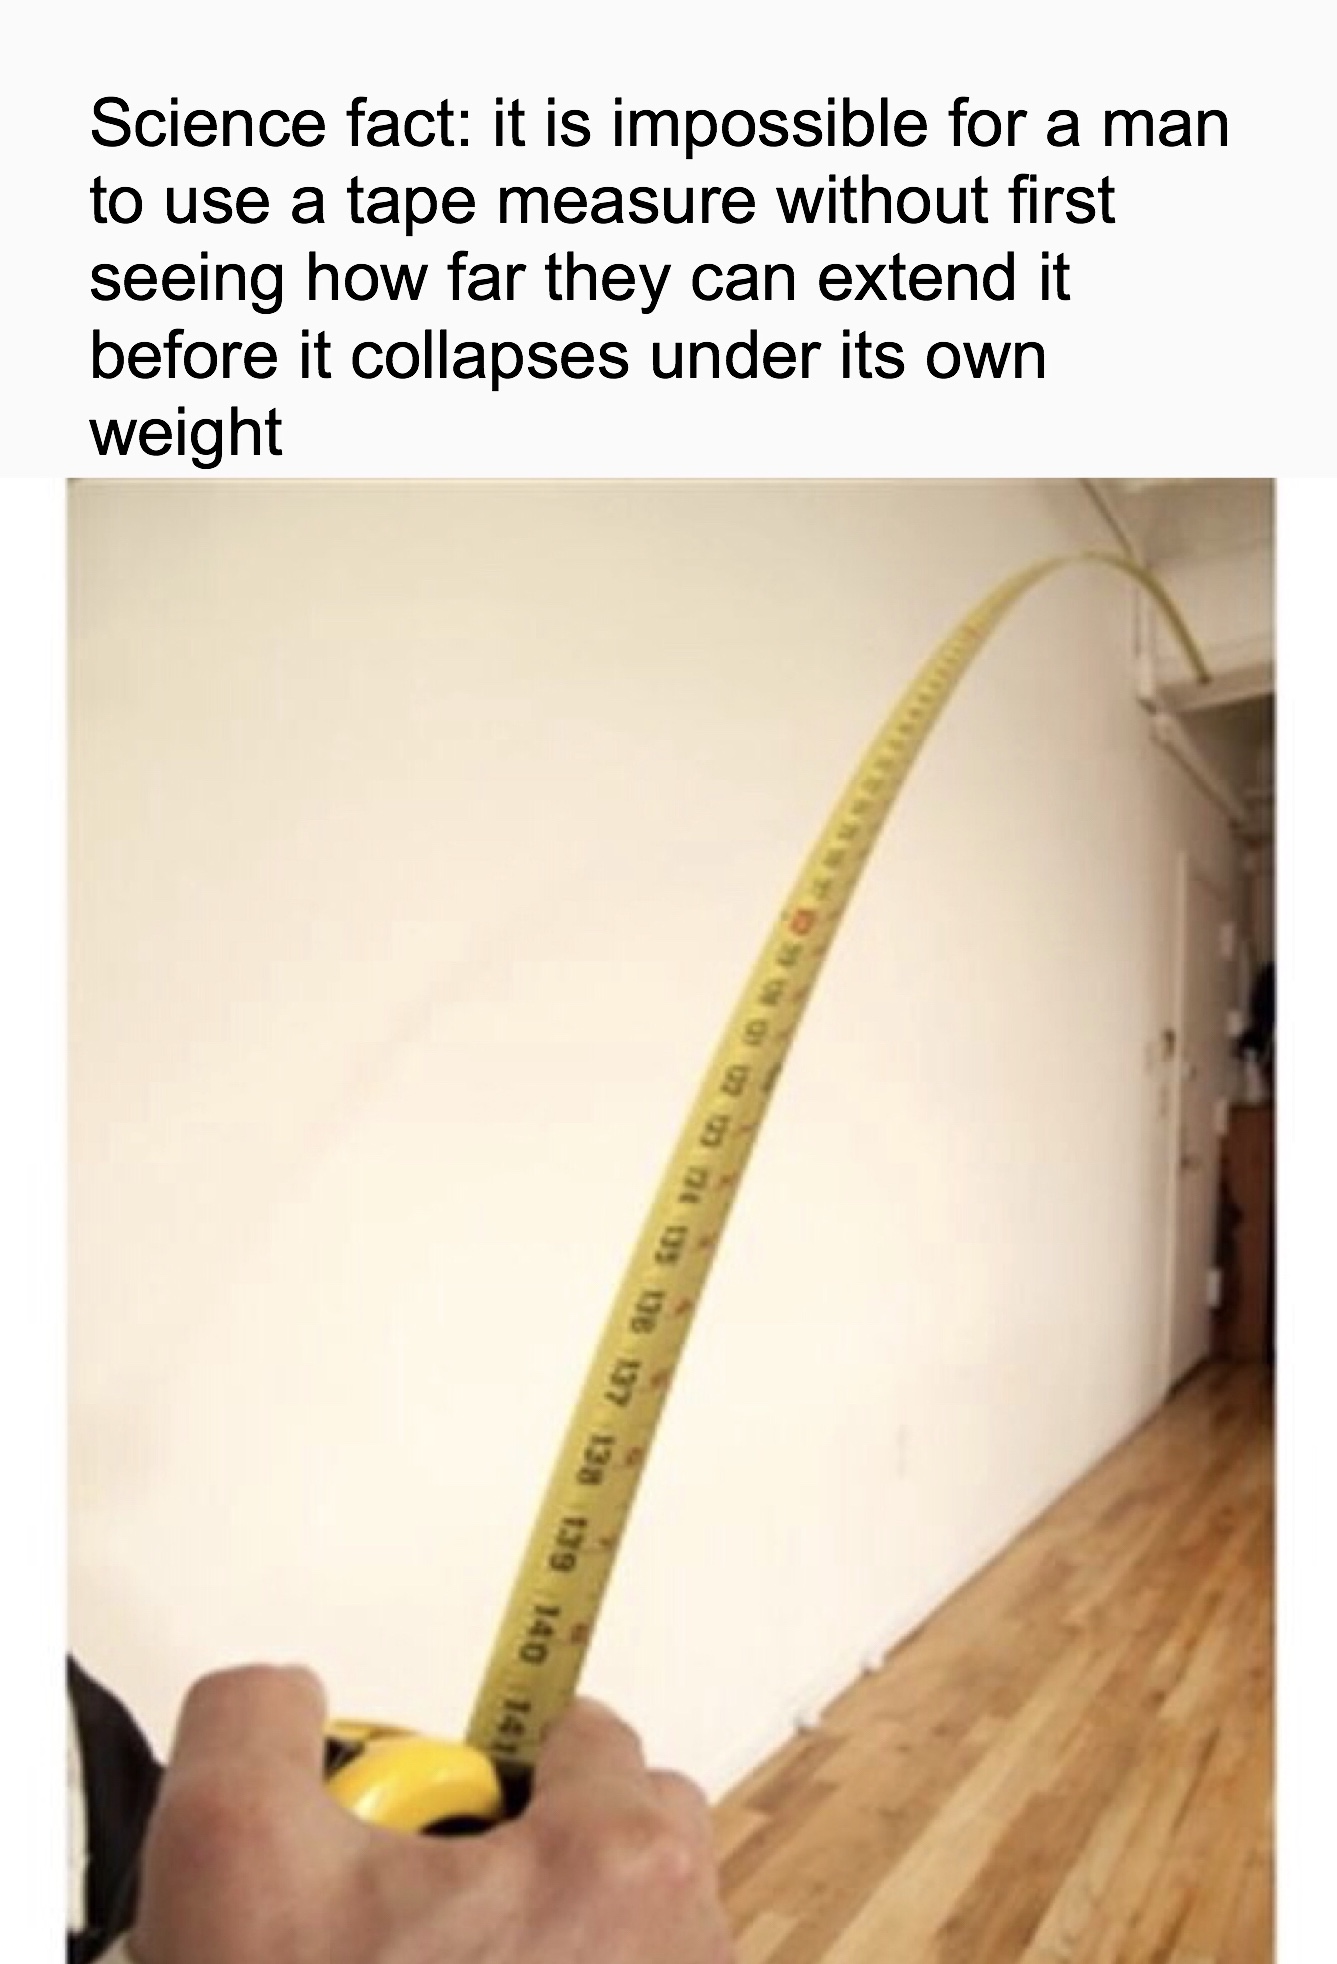 lil kids cough memes - Science fact it is impossible for a man to use a tape measure without first seeing how far they can extend it before it collapses under its own weight m nius 138 137 138 139 140 141